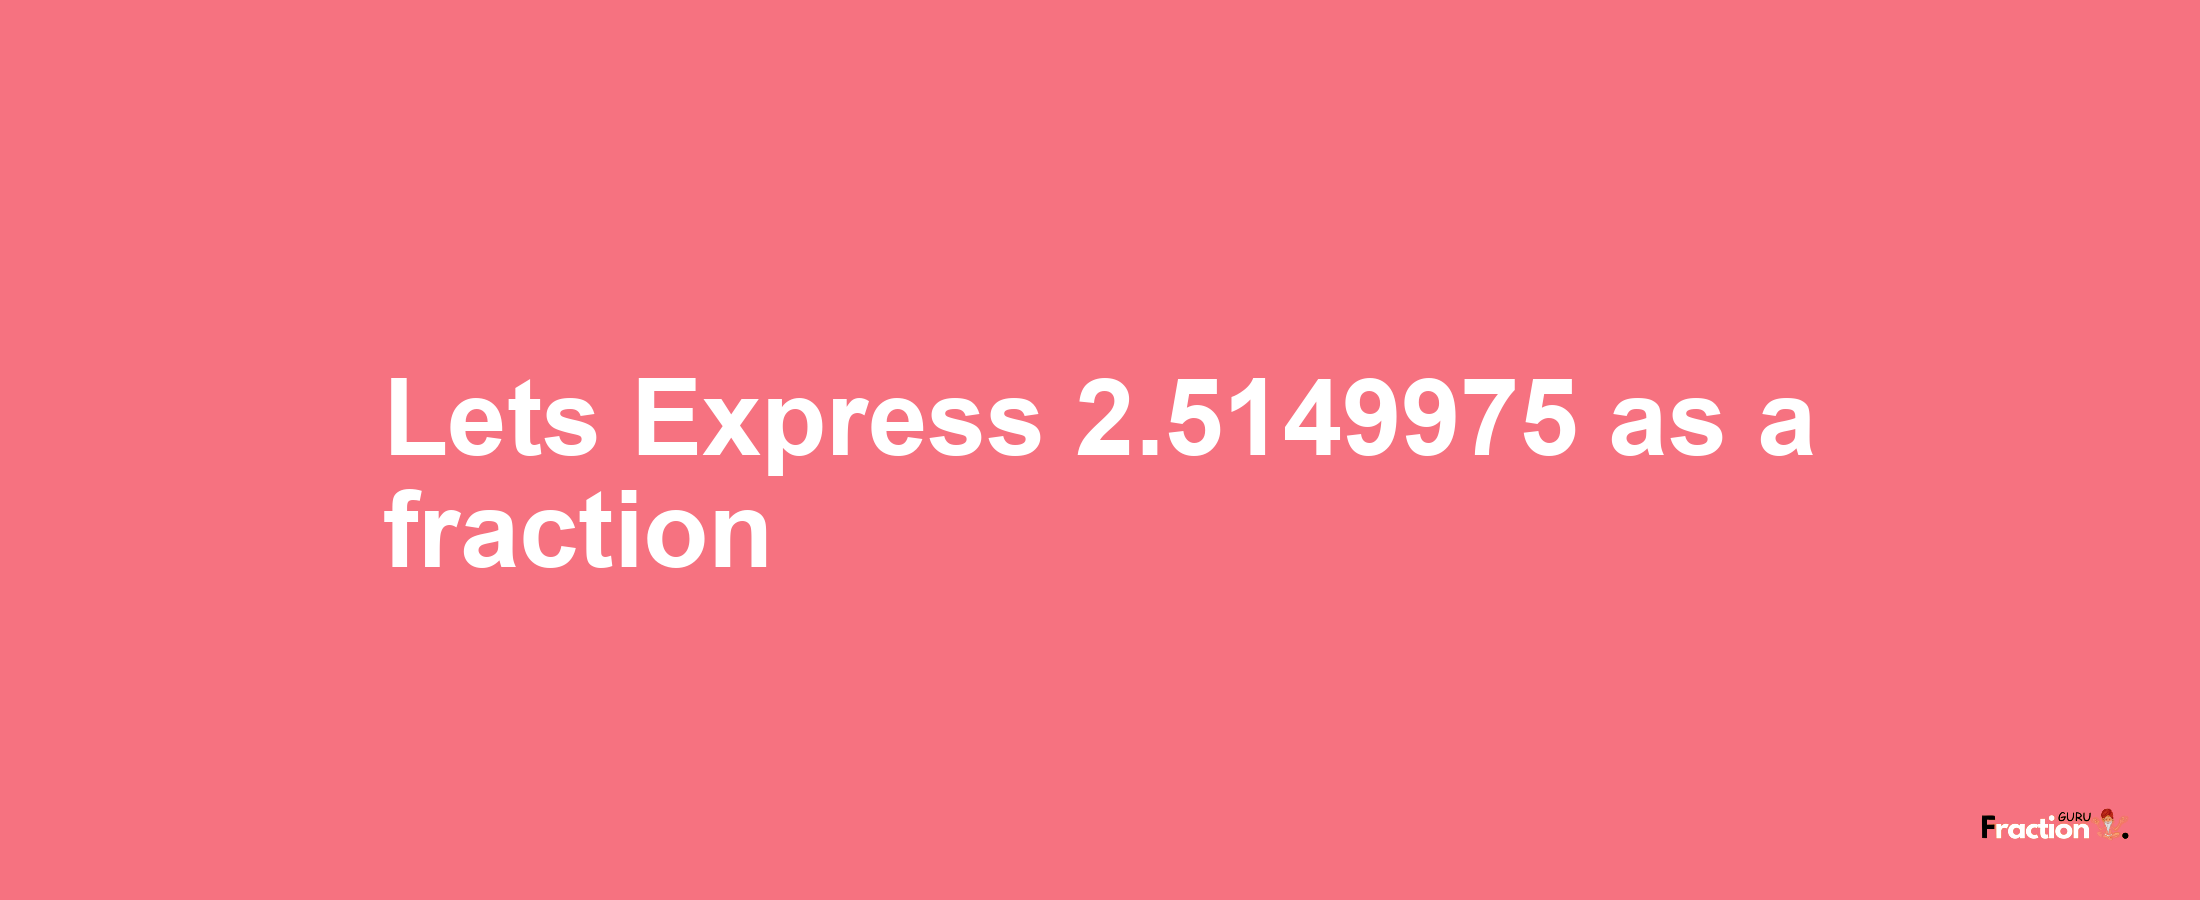 Lets Express 2.5149975 as afraction